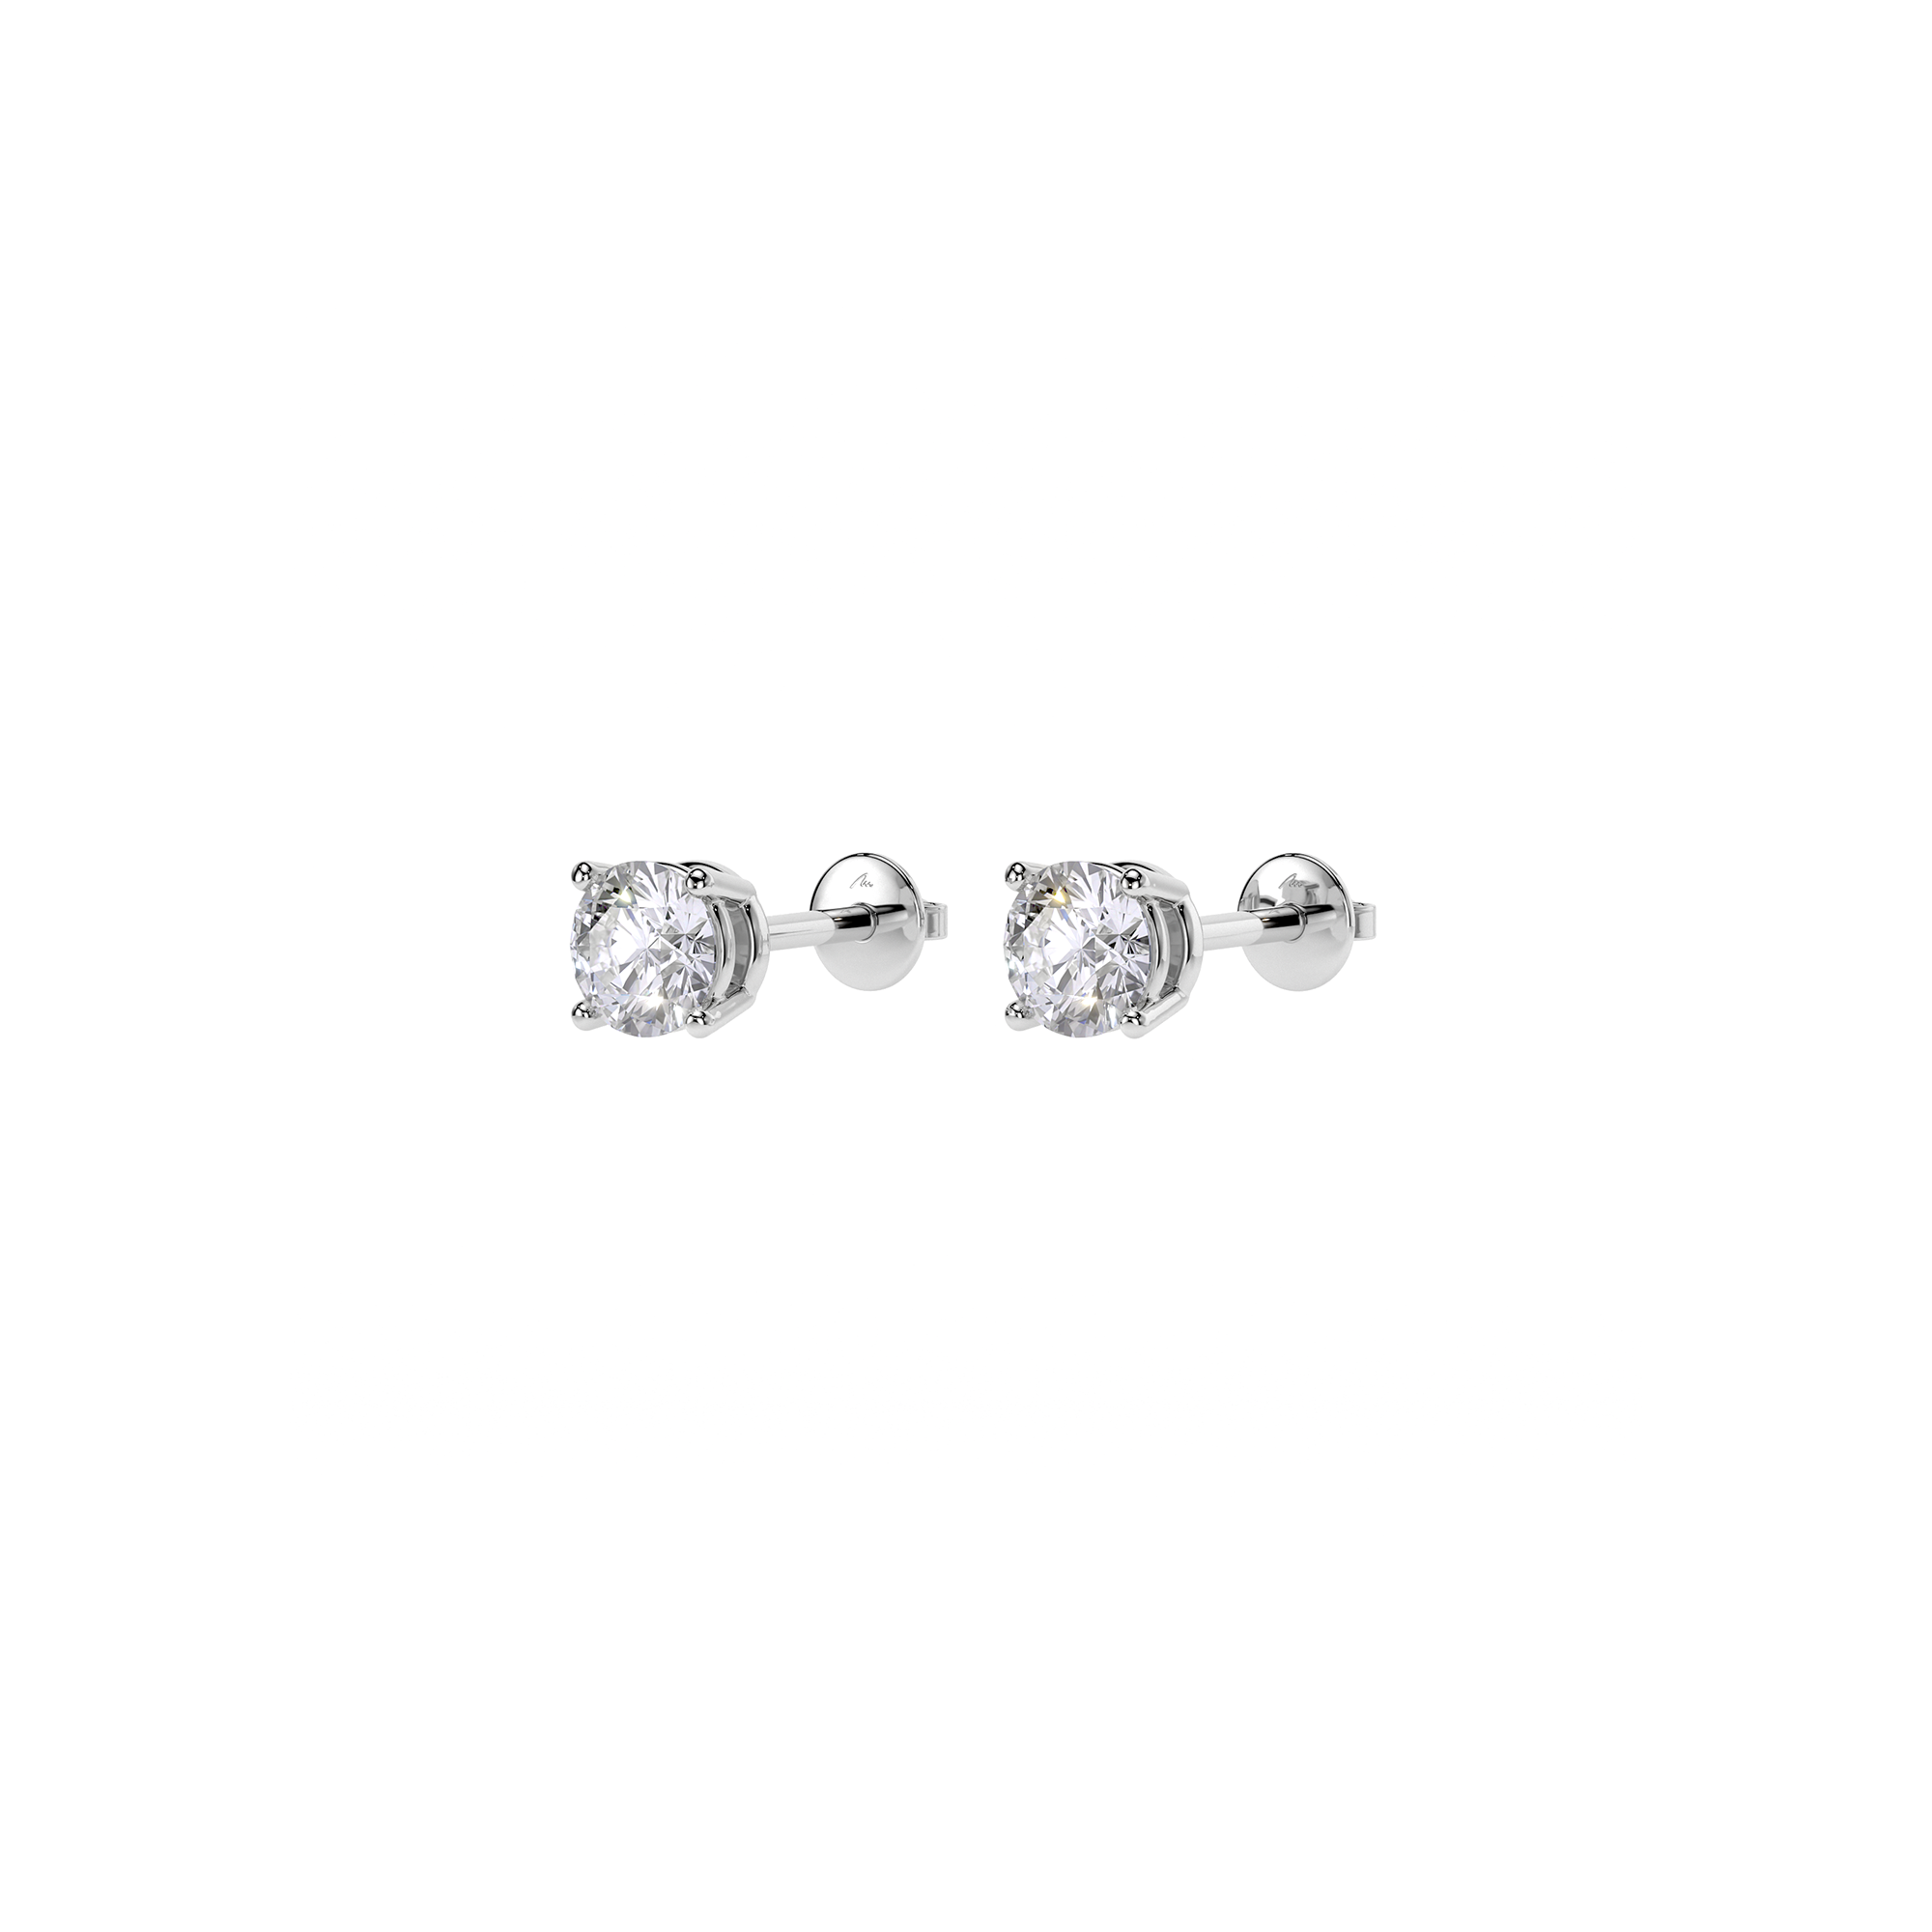 14 K white gold Studs earrings with 1.14 CT Lab Diamonds